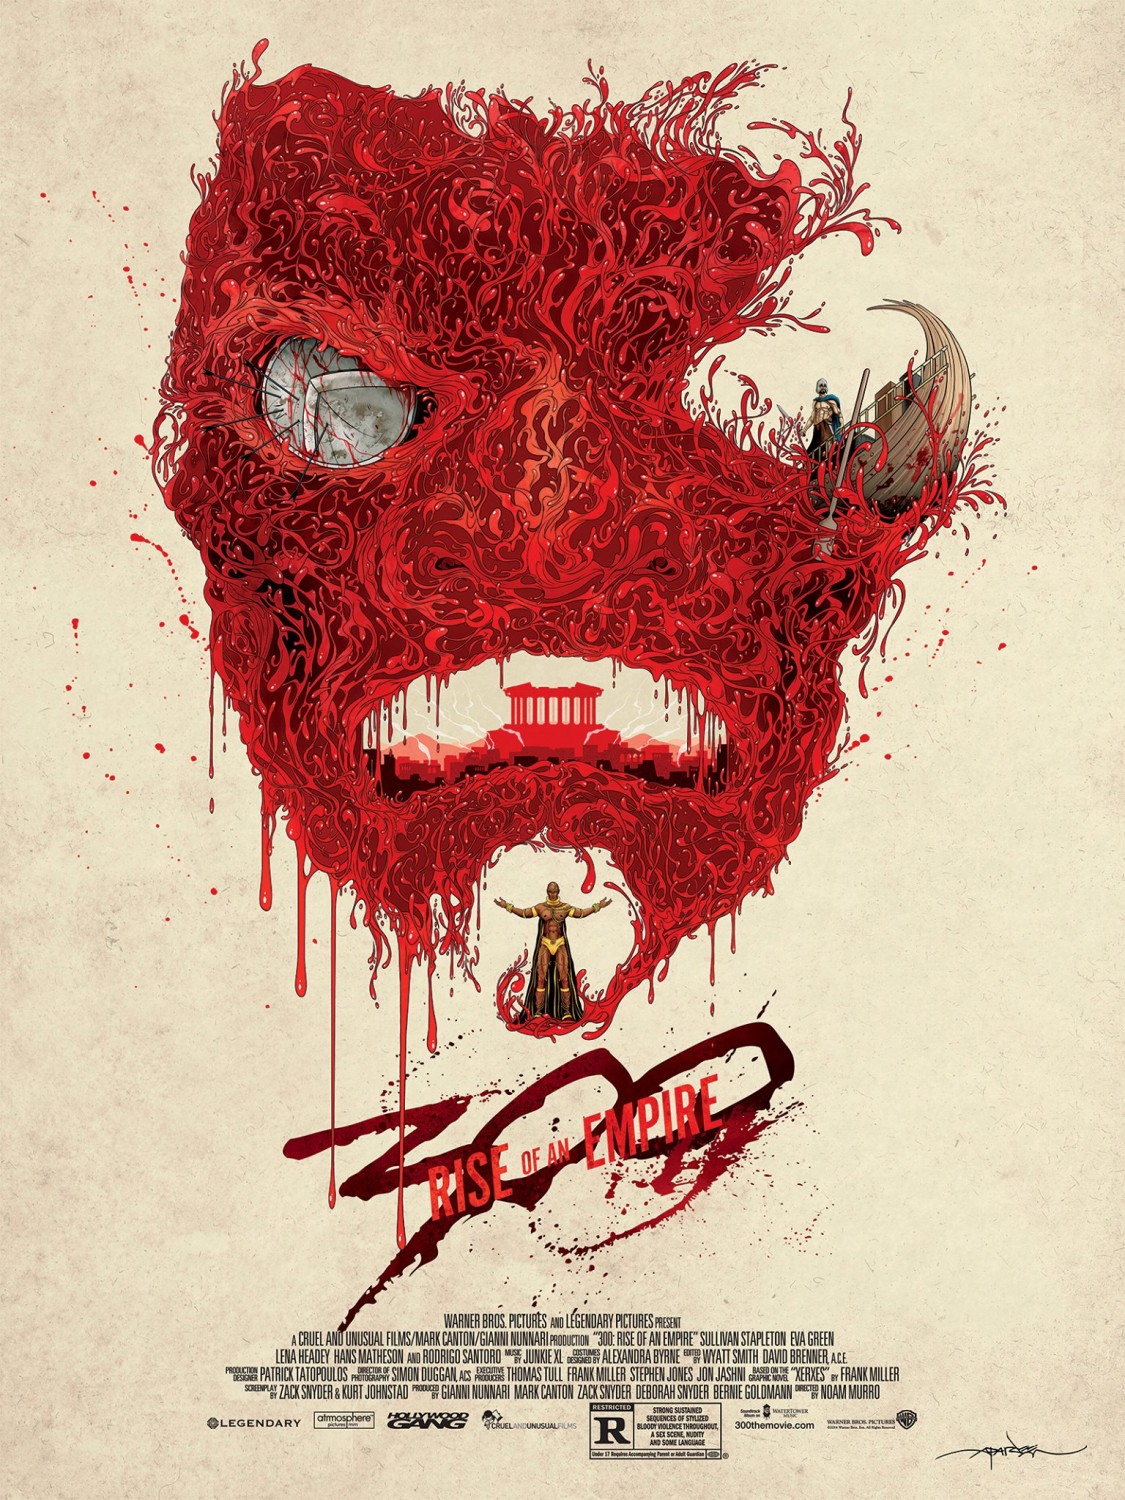 Extra Large Movie Poster Image for 300: Rise of an Empire (#18 of 20)